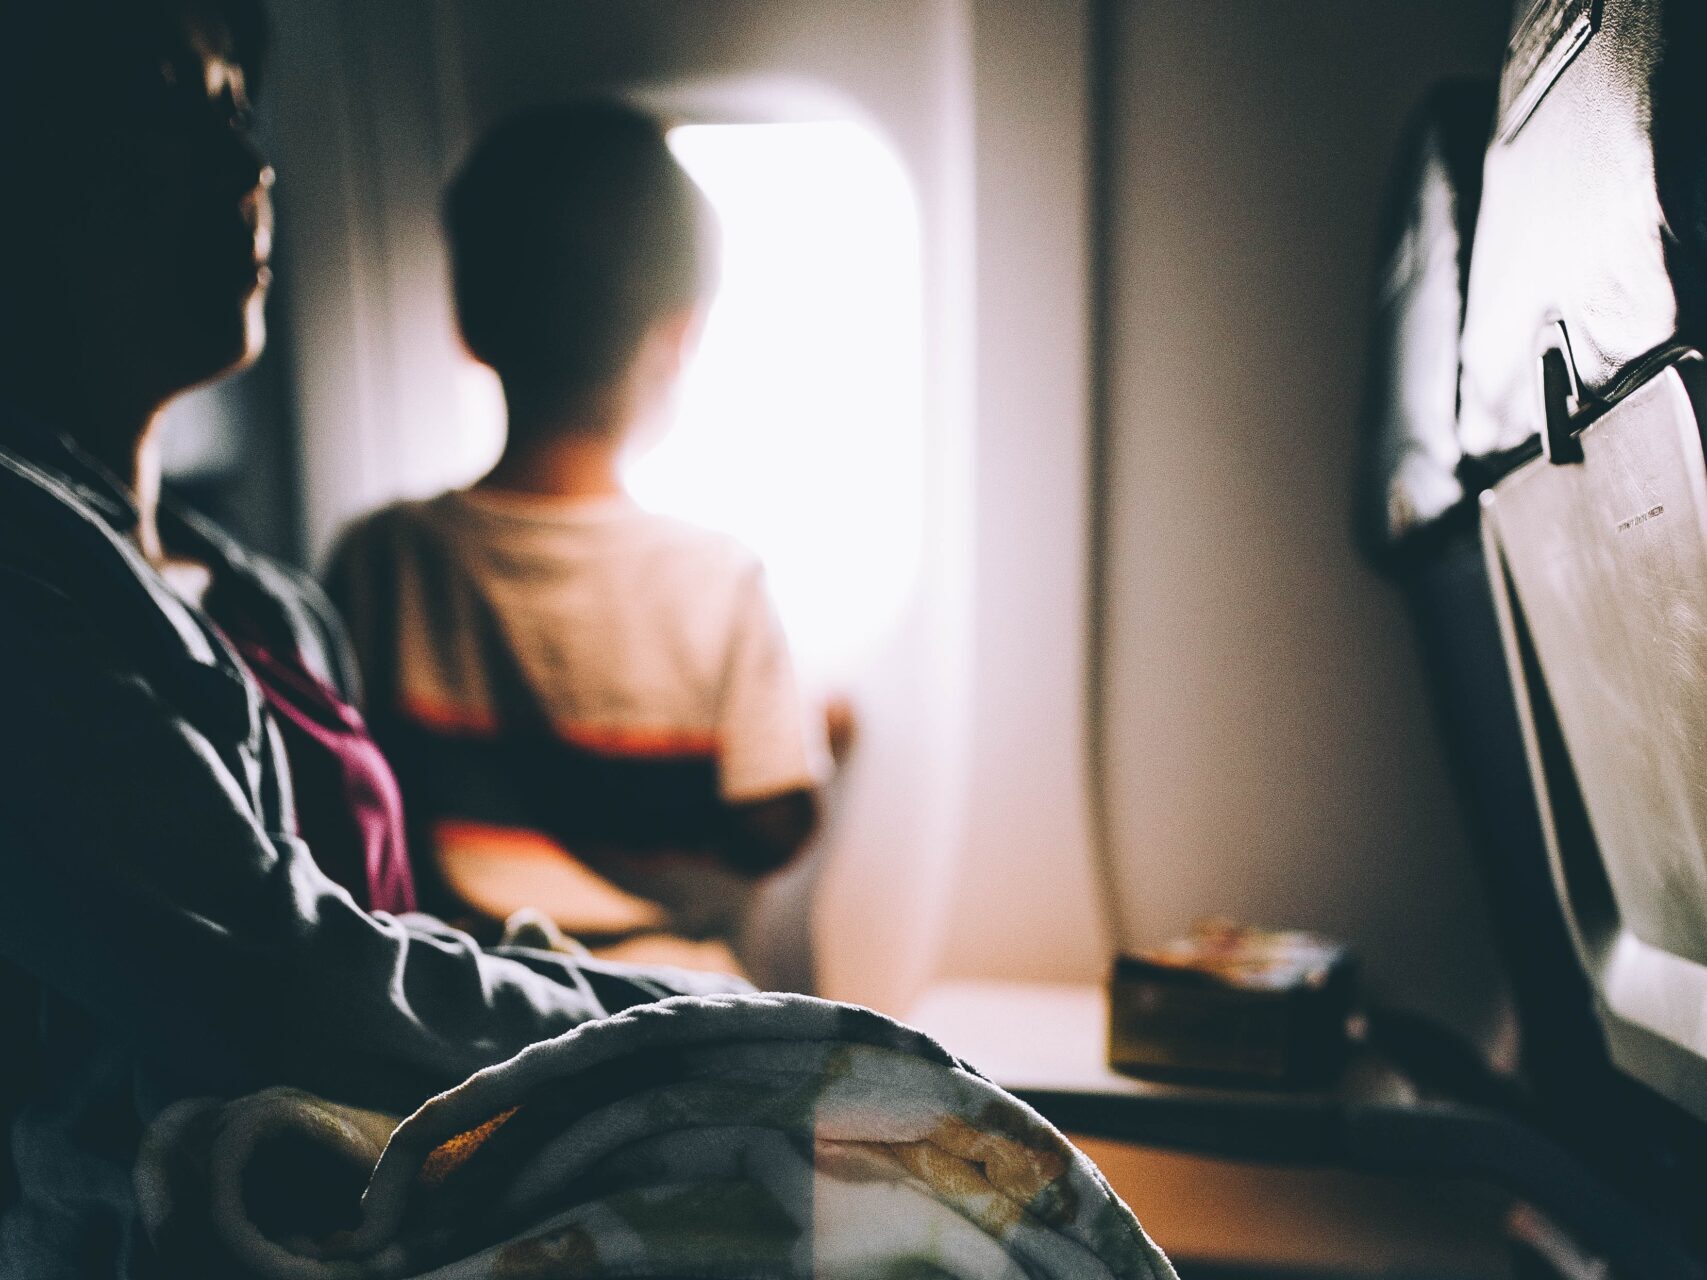 Flight Attendants Want to Ban Parents from Sitting Children on Their Lap